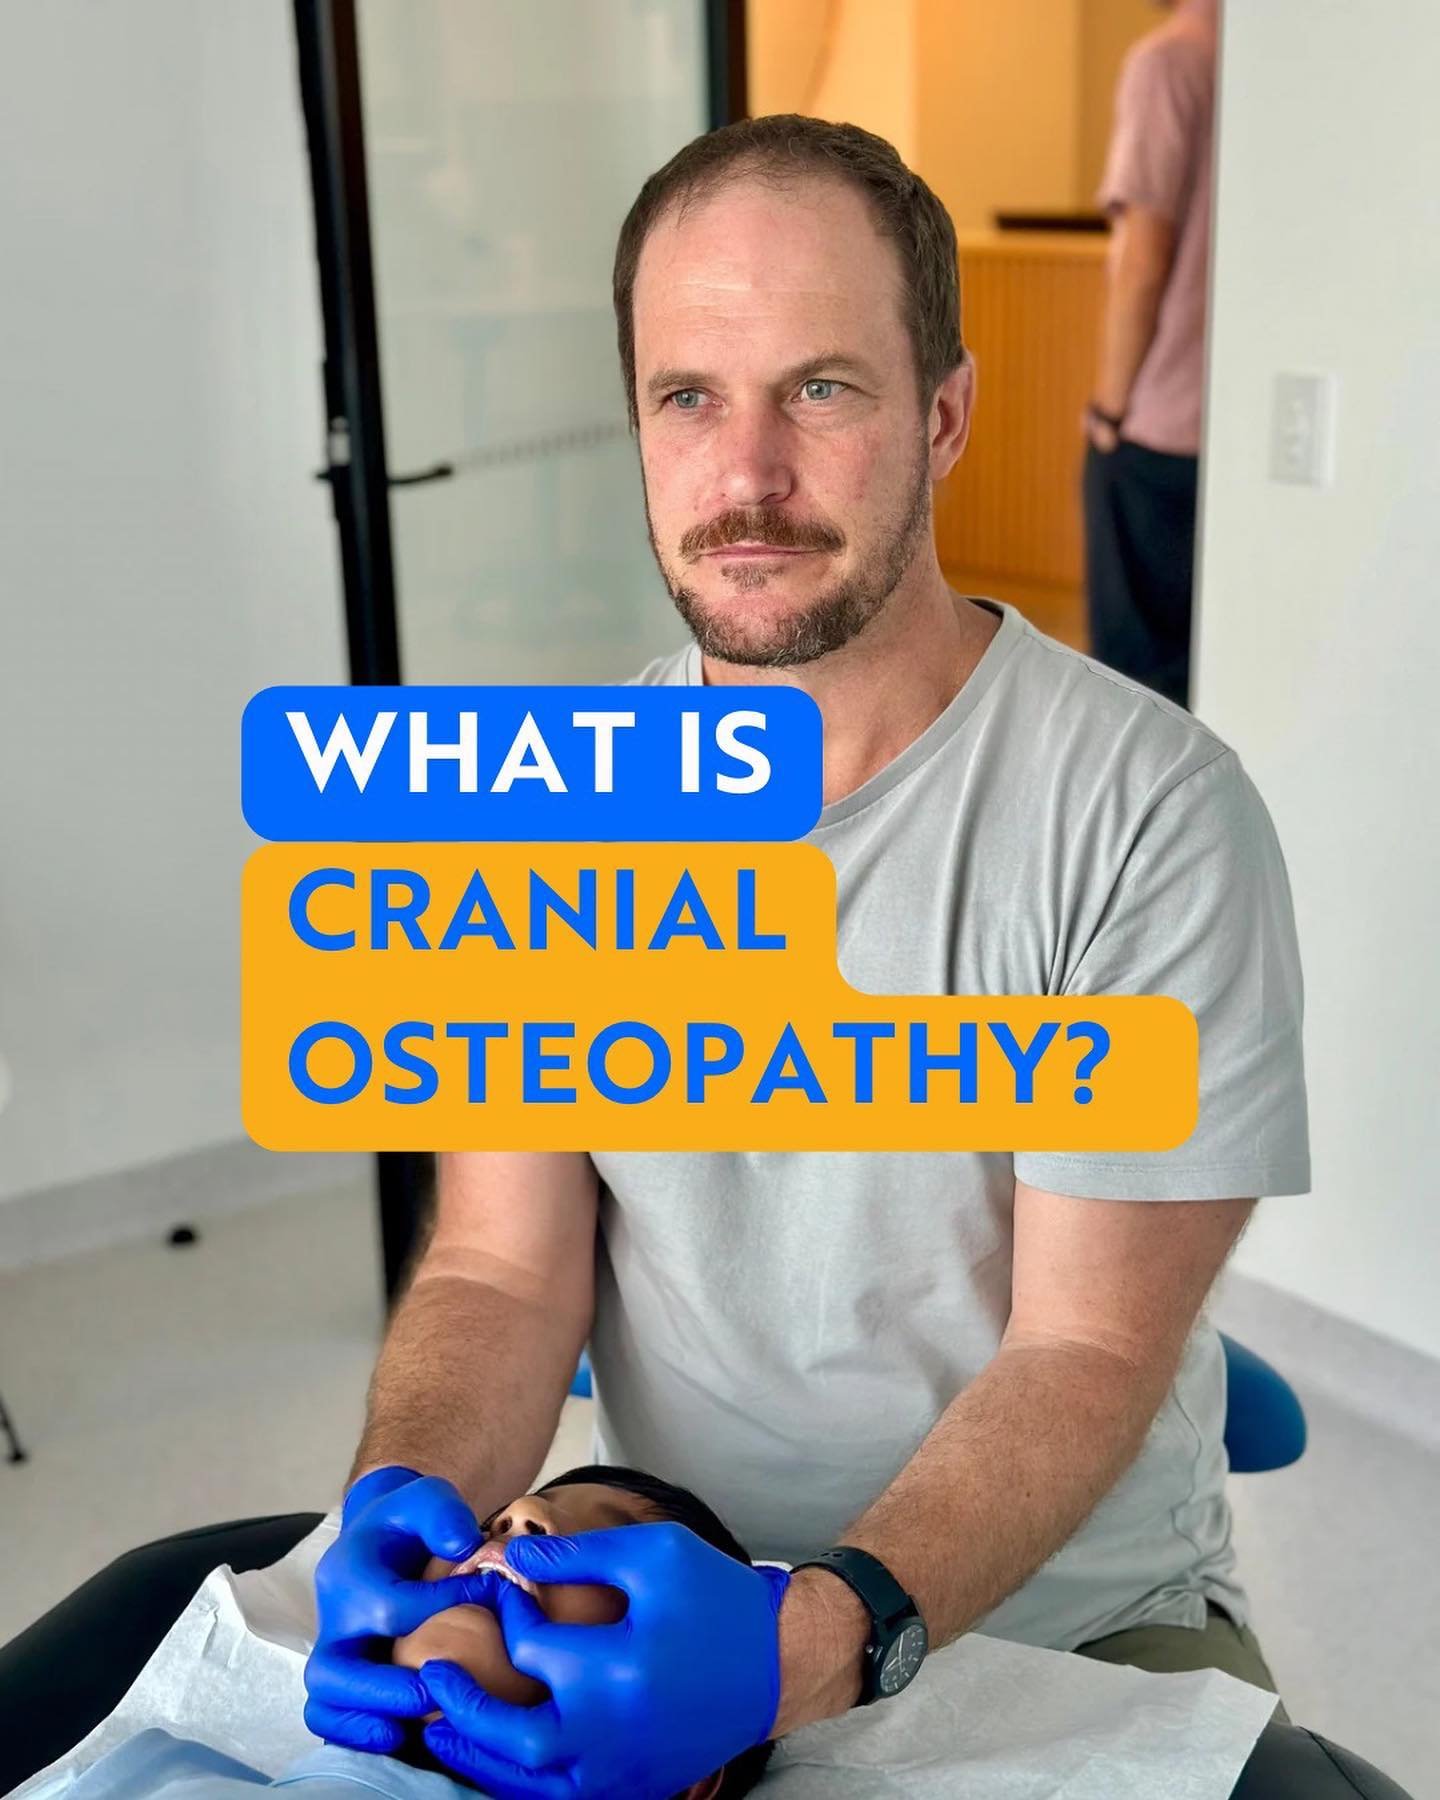 Have you ever heard of OSTEOPATHY? 👥

How about CRANIAL OSTEOPATHY?

#cranialosteopathy #cranialosteopath #osteopath #osteopathy #dentistry #jawgrowth #cranialstrain #crookedteeth #headaches #kidsdentistry #kidsdentist #sydneydentist #sydneydental #